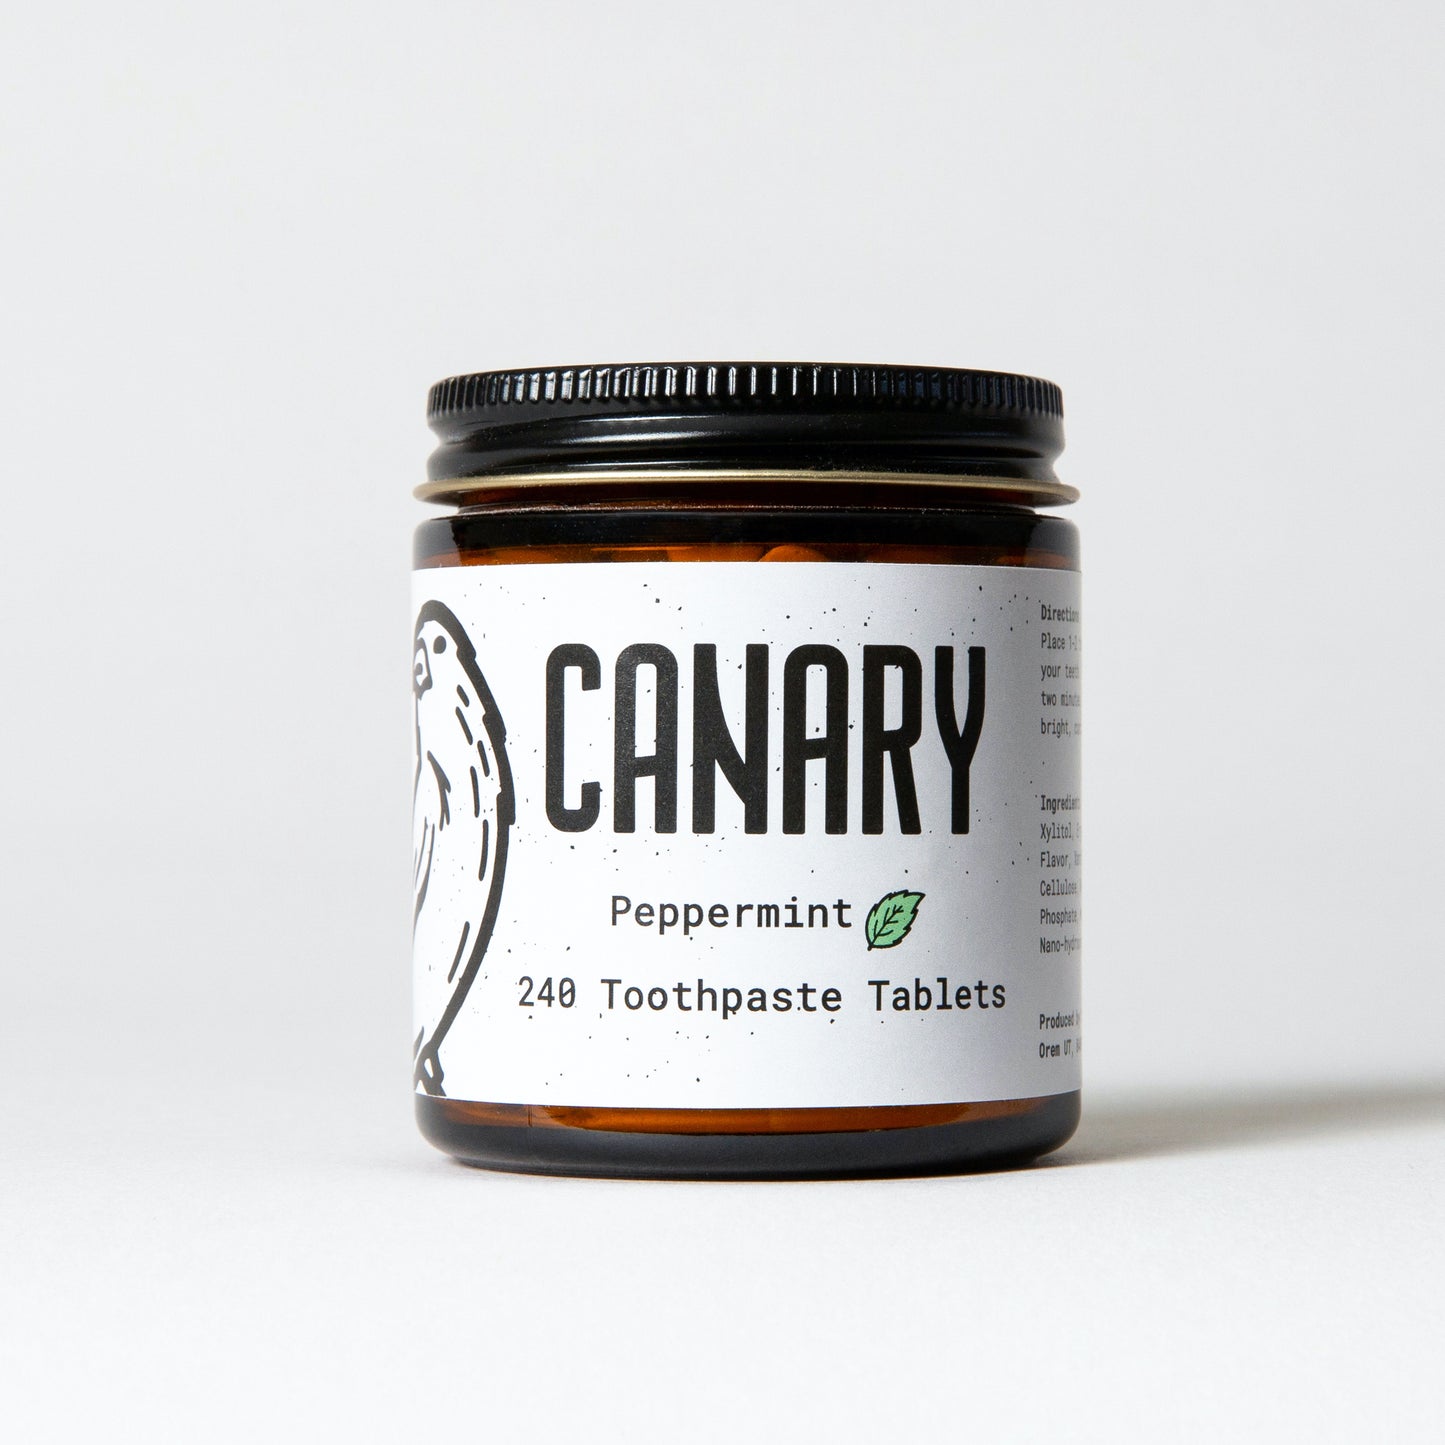 Canary  Peppermint Toothpaste Tablets, 240 count jar, view of front of jar